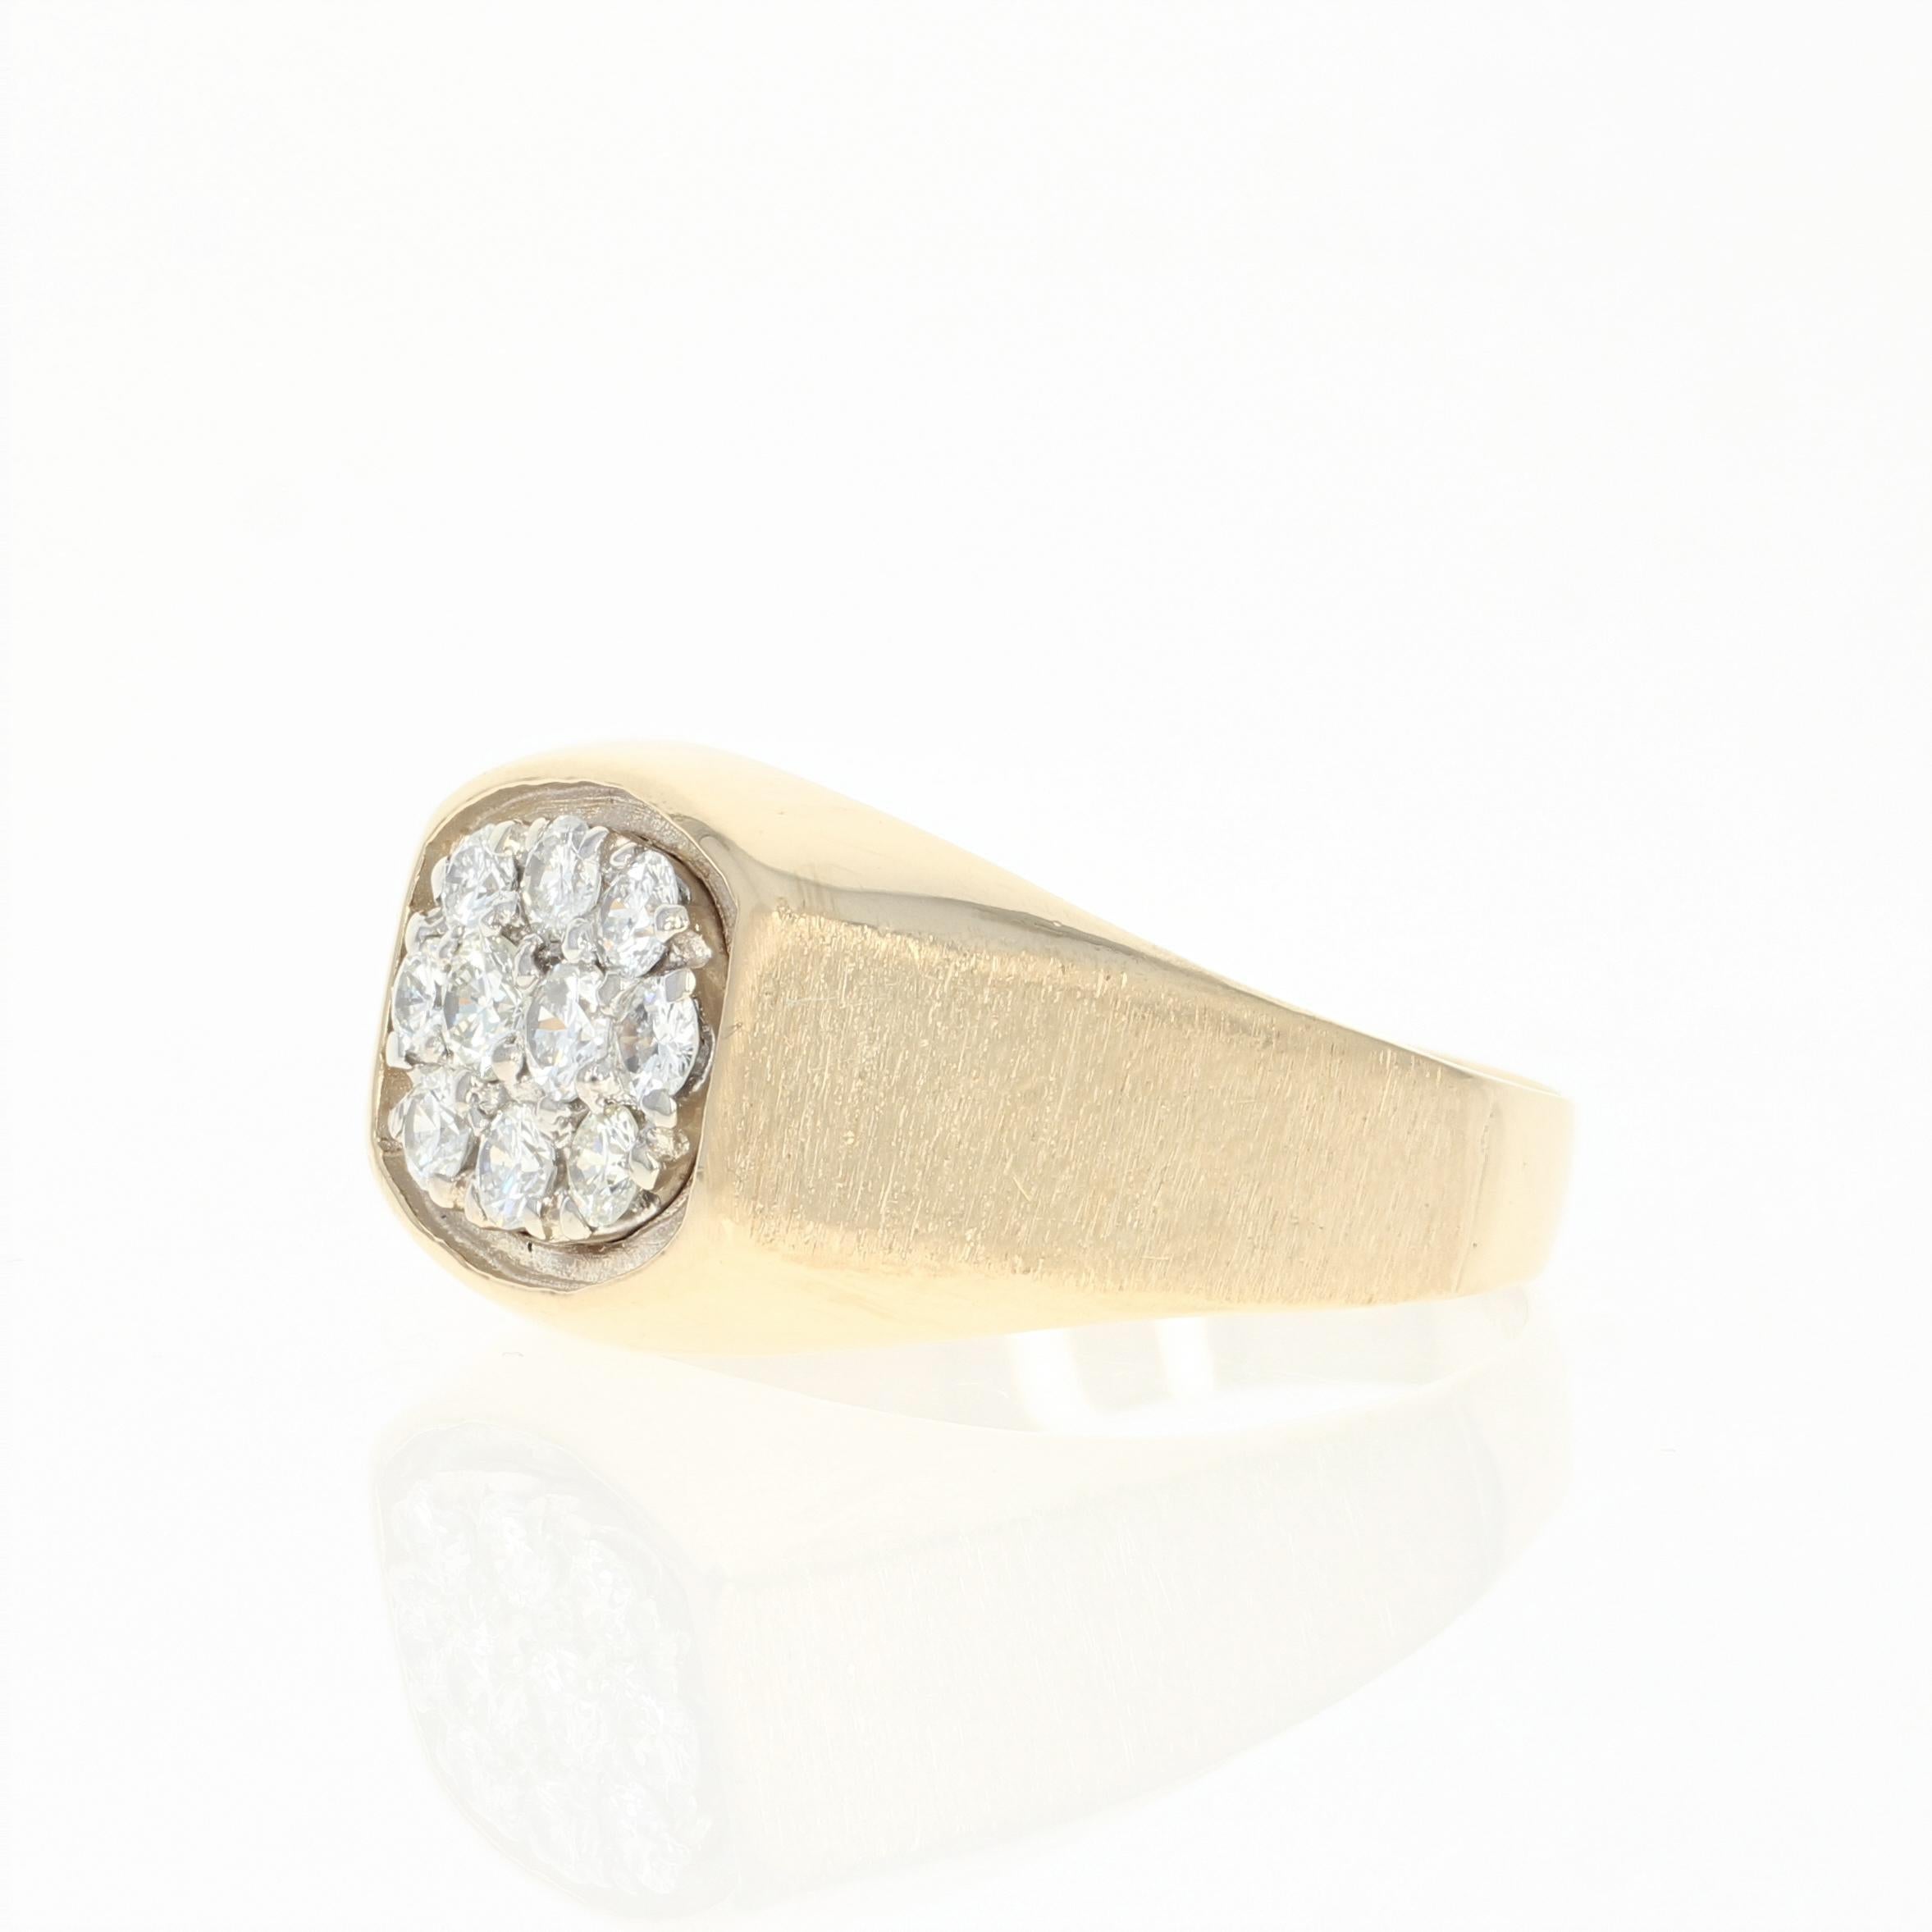 Step out in style! Crafted in glowing 14k yellow gold, this sharp ring showcases a radiant cluster of natural diamonds set in 14k white gold. The ring’s shoulders display a brushed finish that handsomely contrasts with the remainder of the ring’s